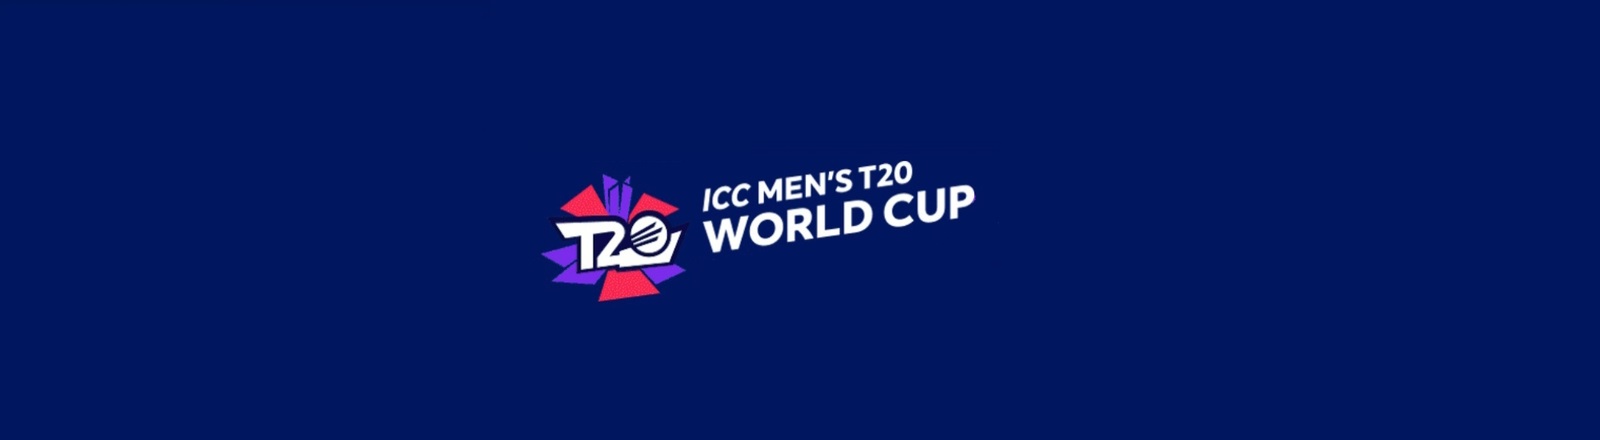 T20 World Cup Tickets